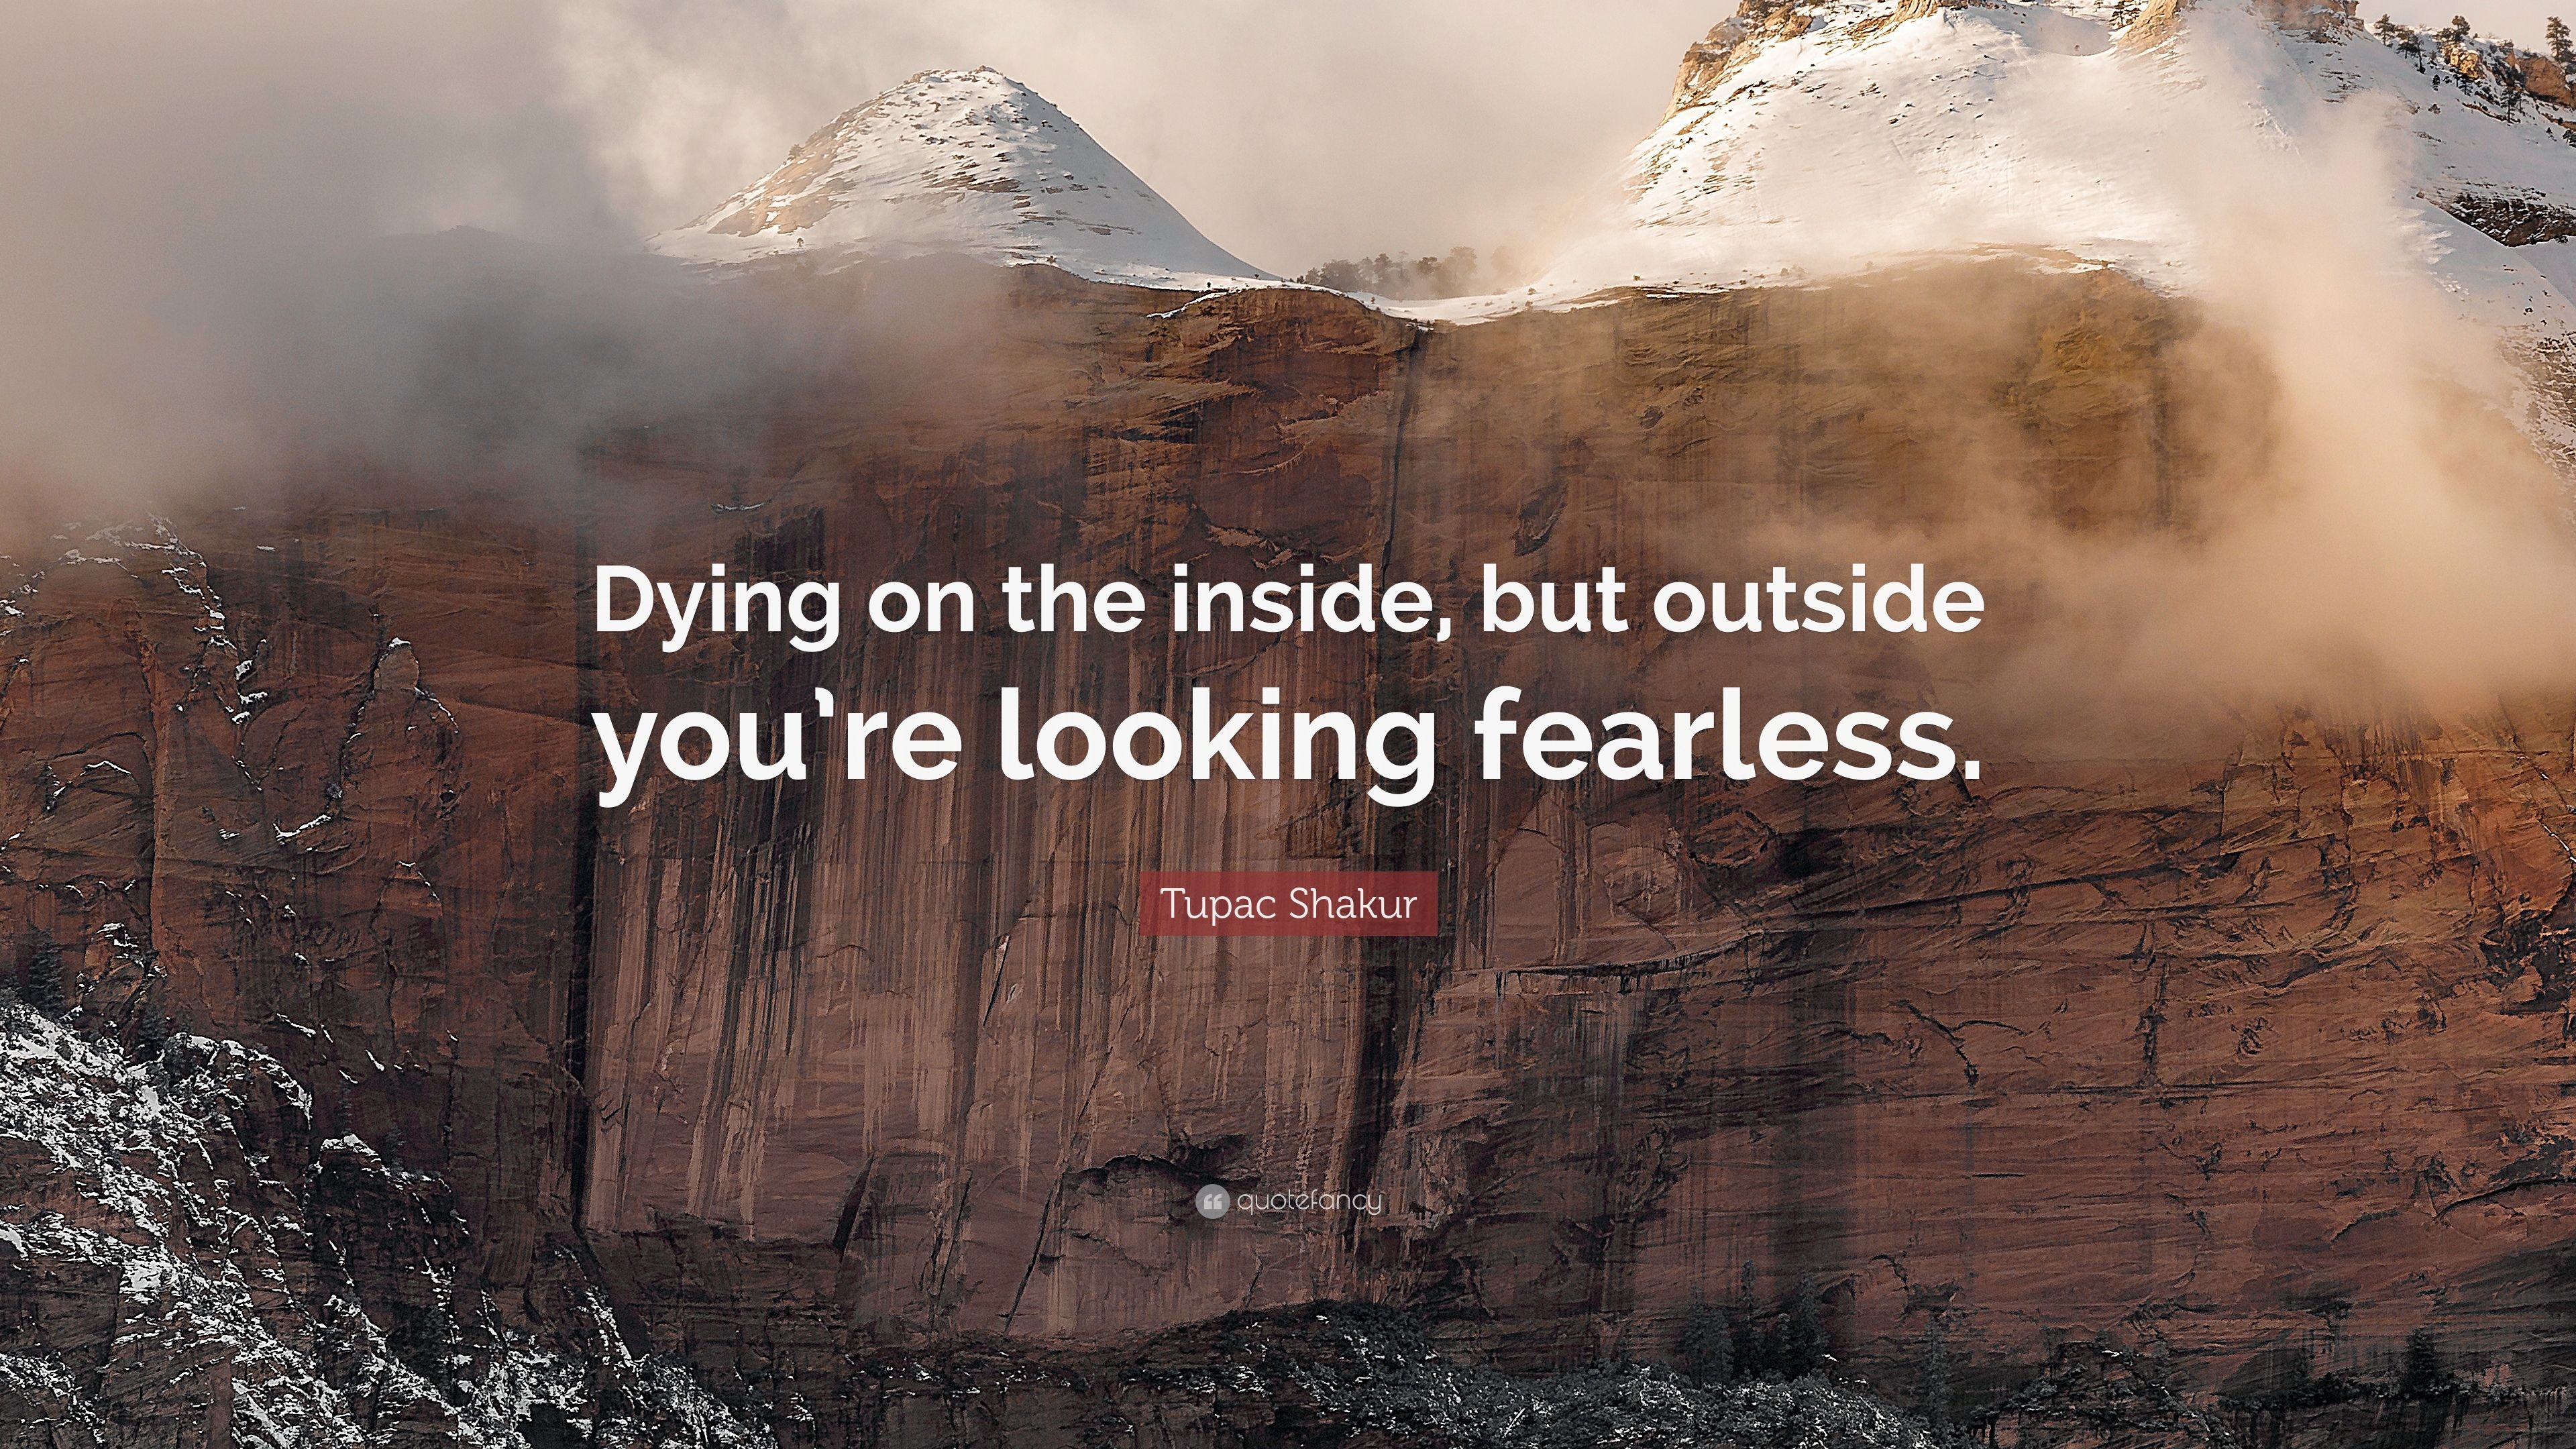 Tupac Shakur Quote: “Dying on the inside, but outside you're looking fearless.” (10 wallpaper)